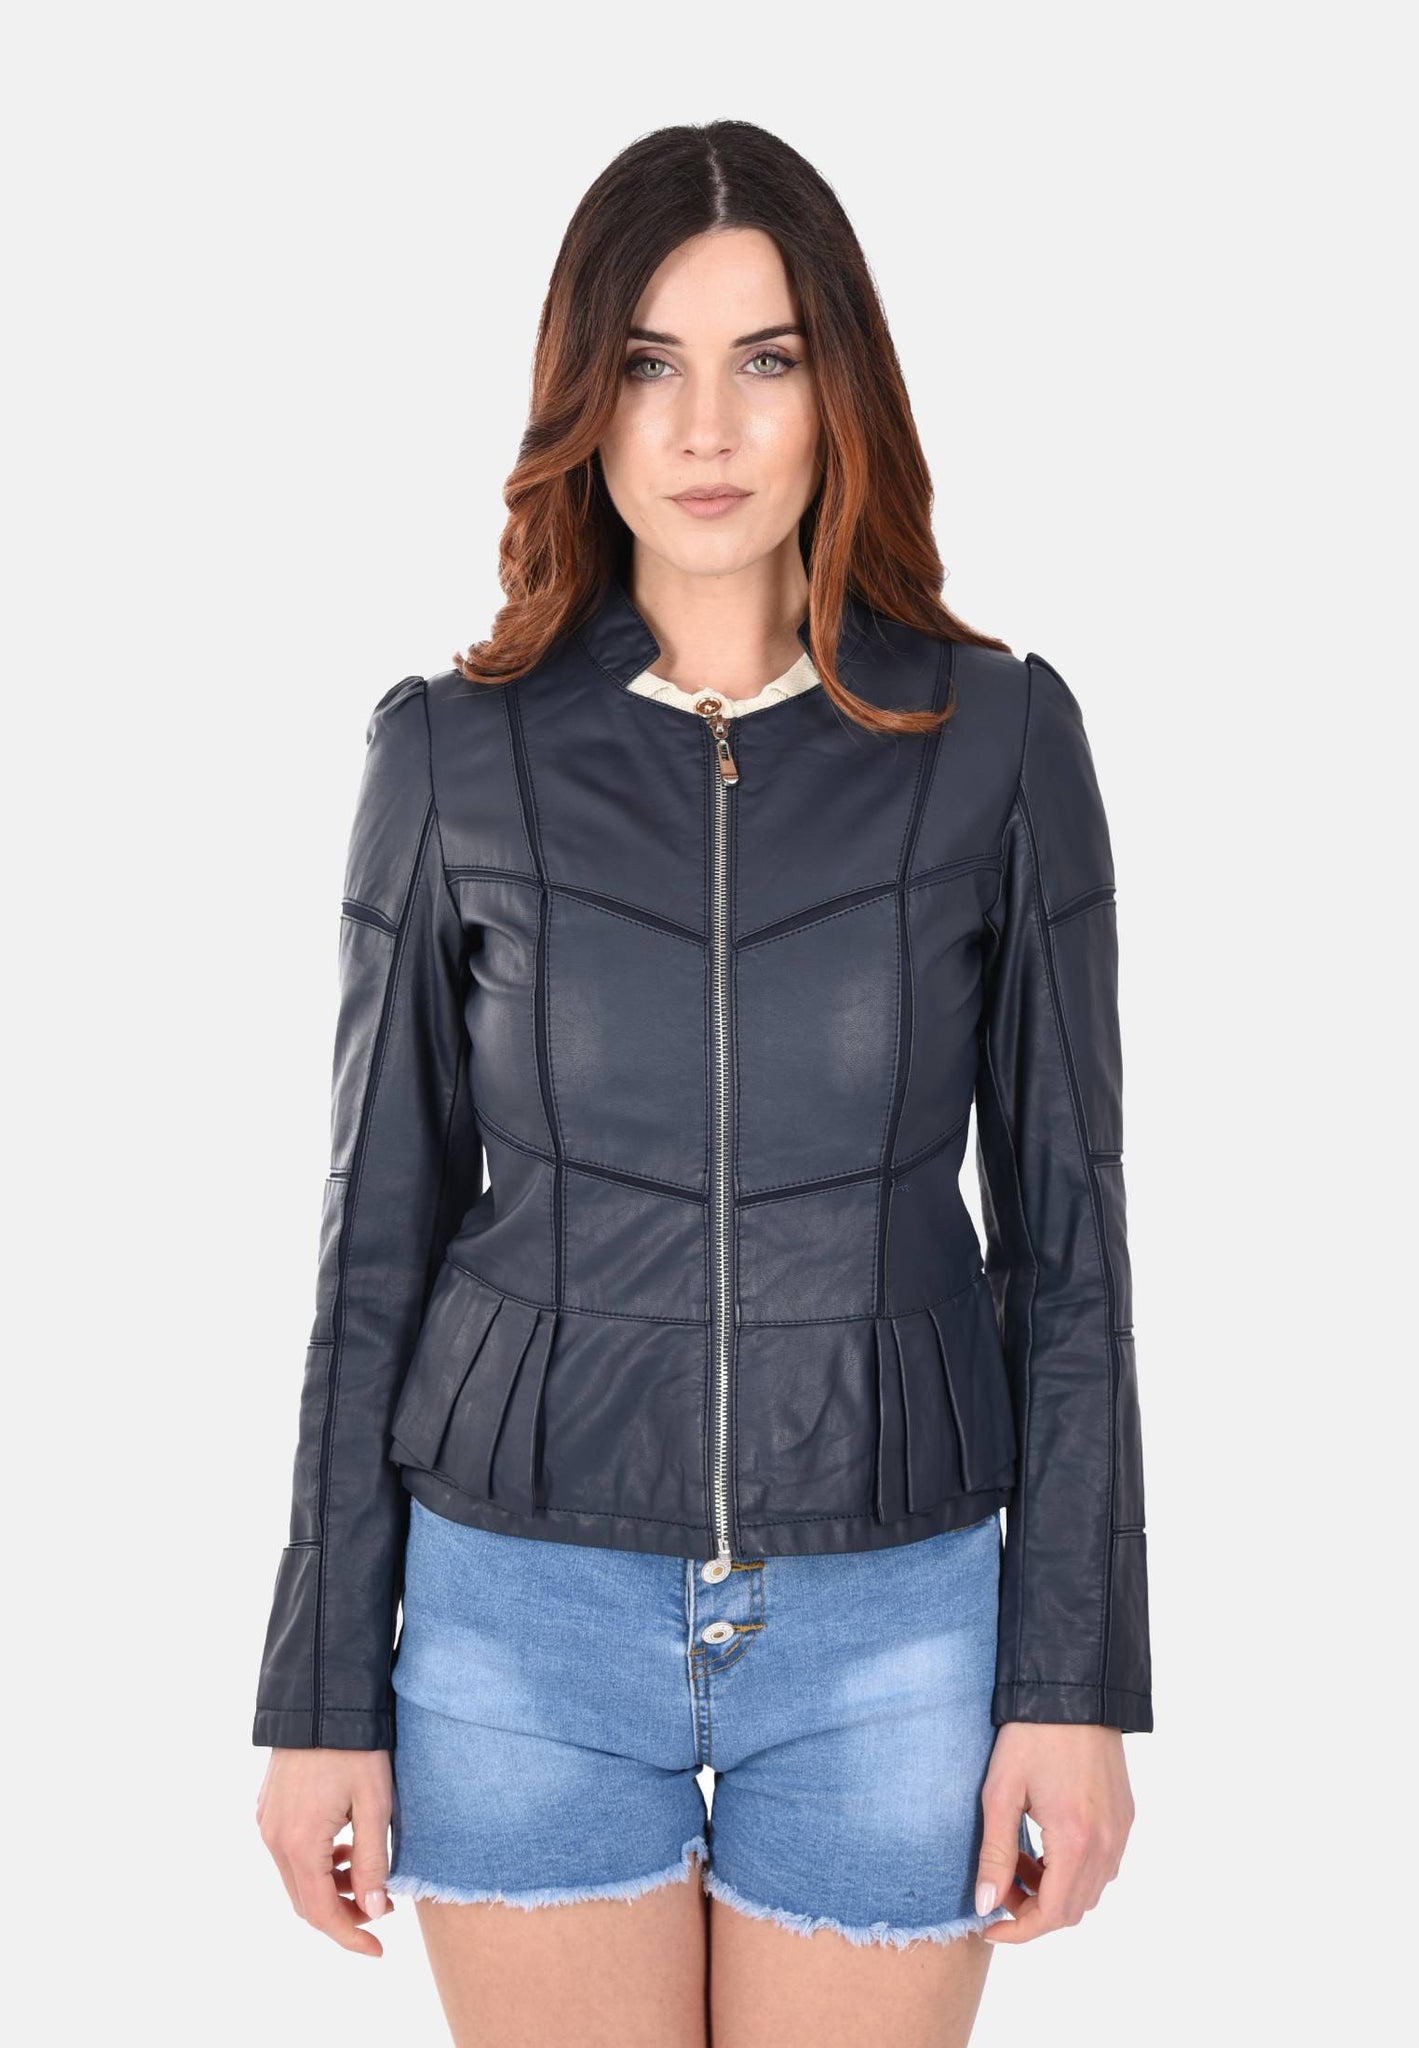 Faux leather jacket with ruffles